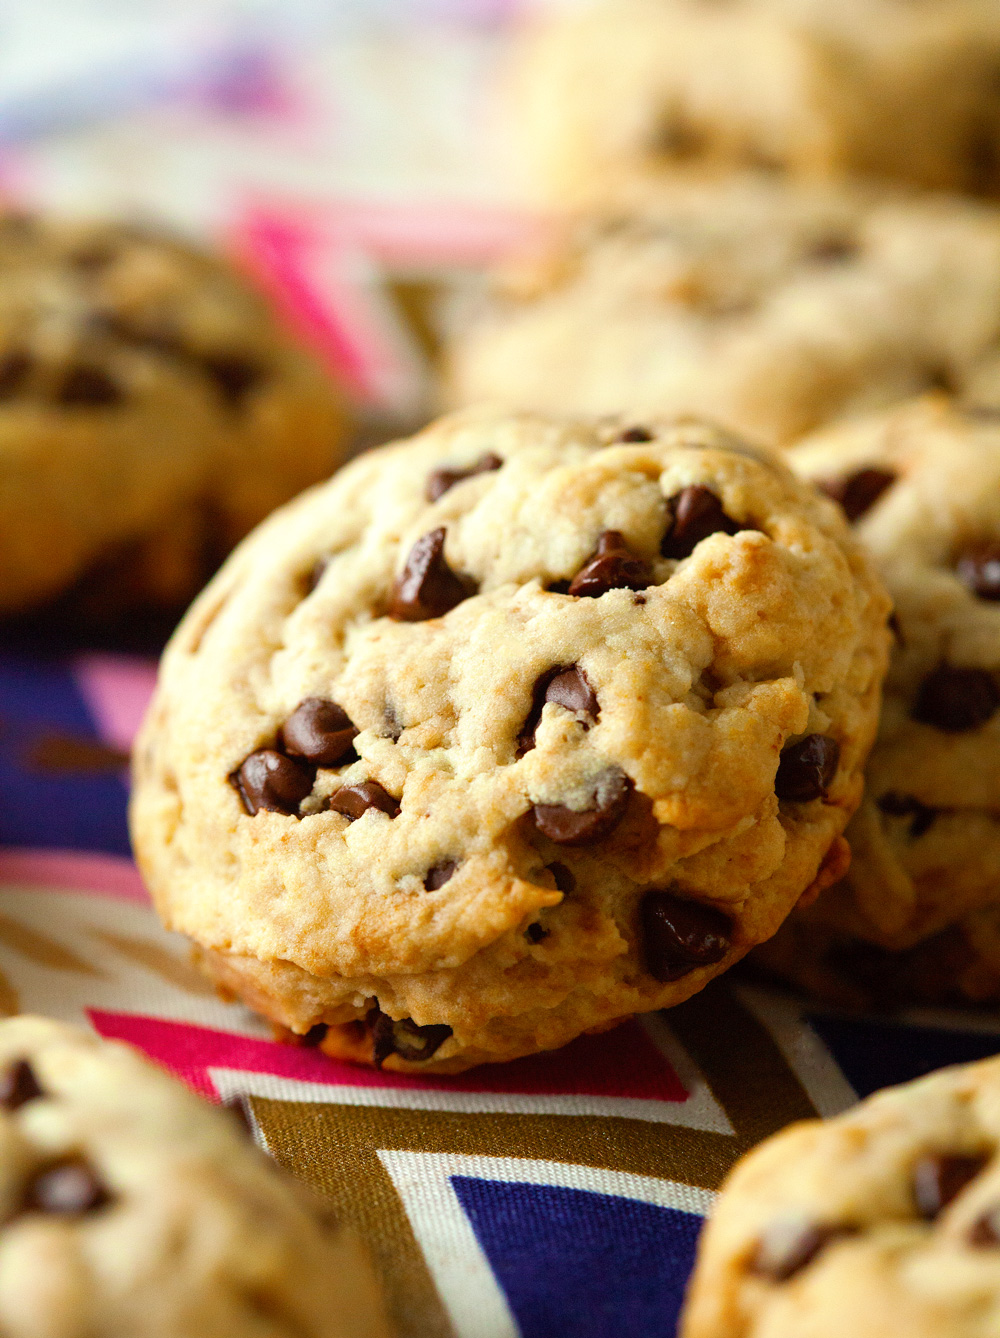 Steps to Prepare Healthy Chocolate Chip Cookie Recipes